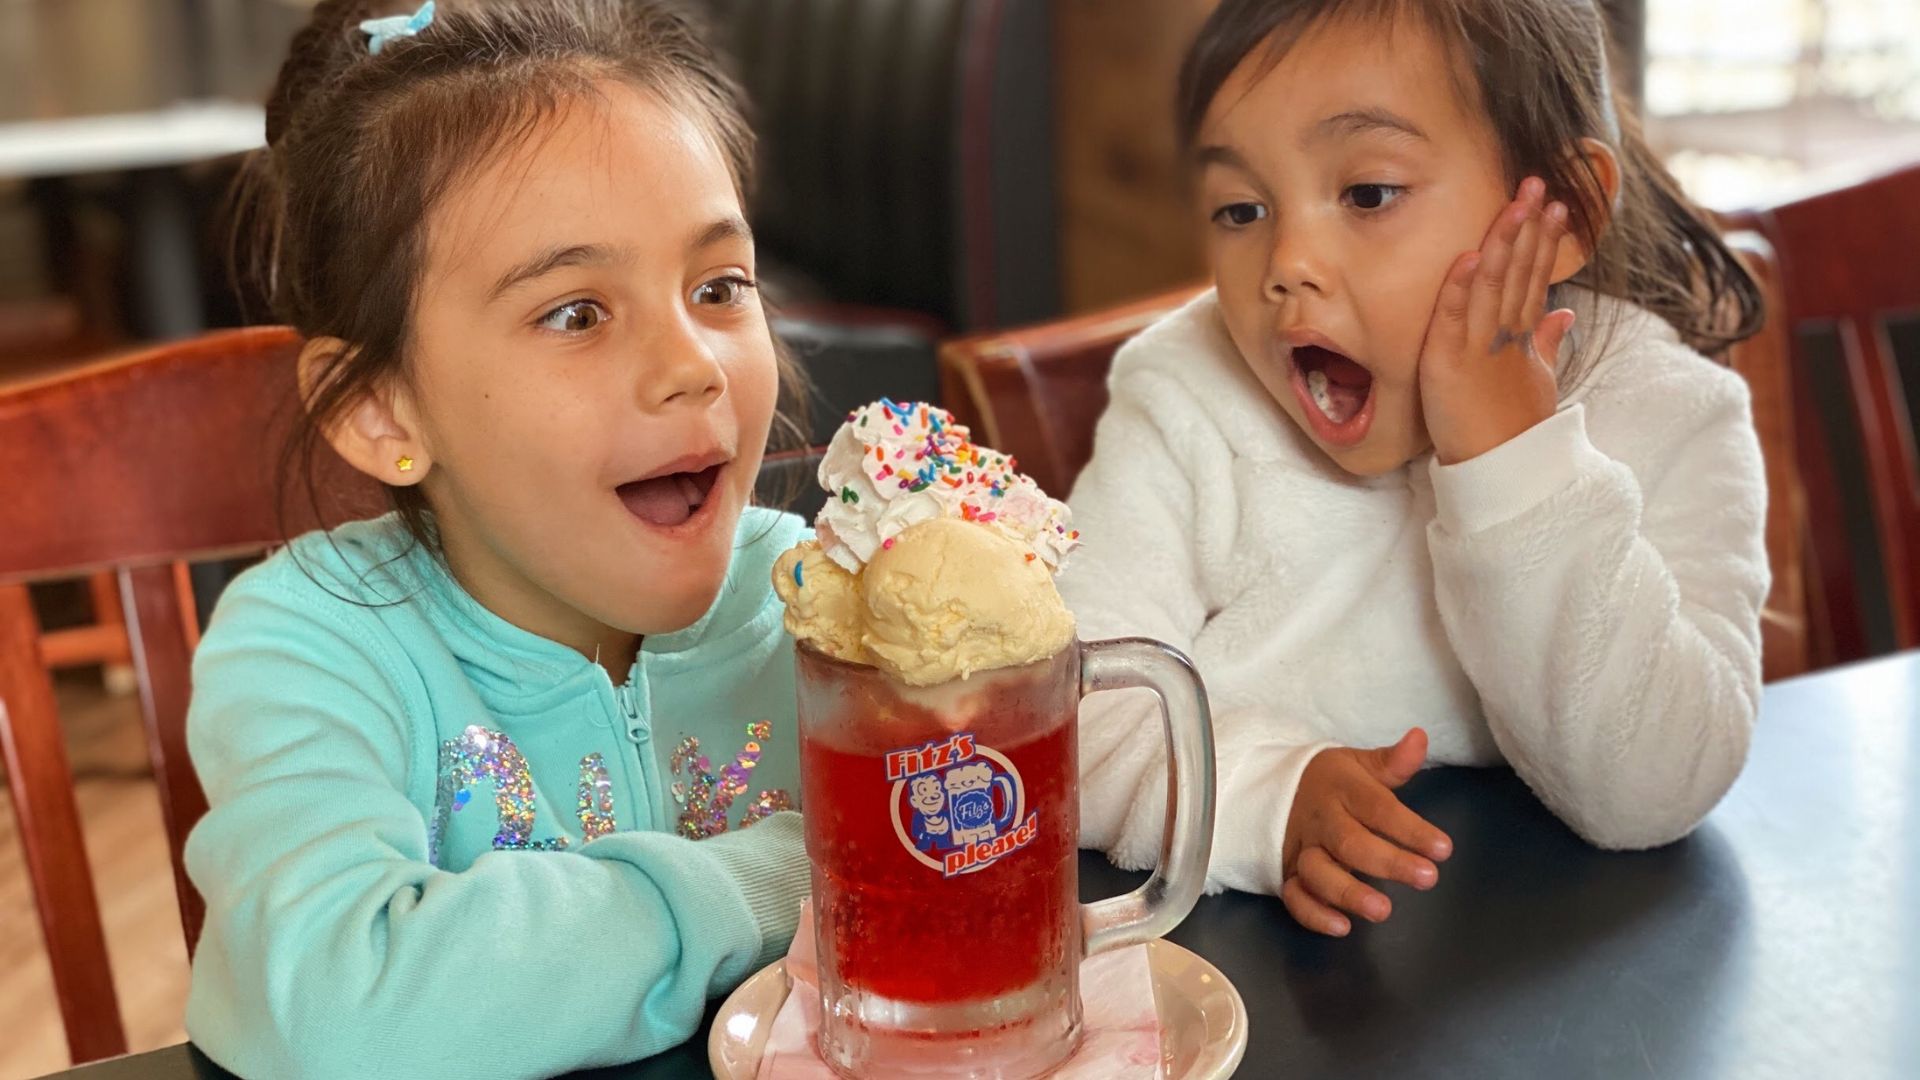 Two girls show their enthusiasm for an ice cream float from Fitz's, a kid-friendly restaurant in St. Louis.